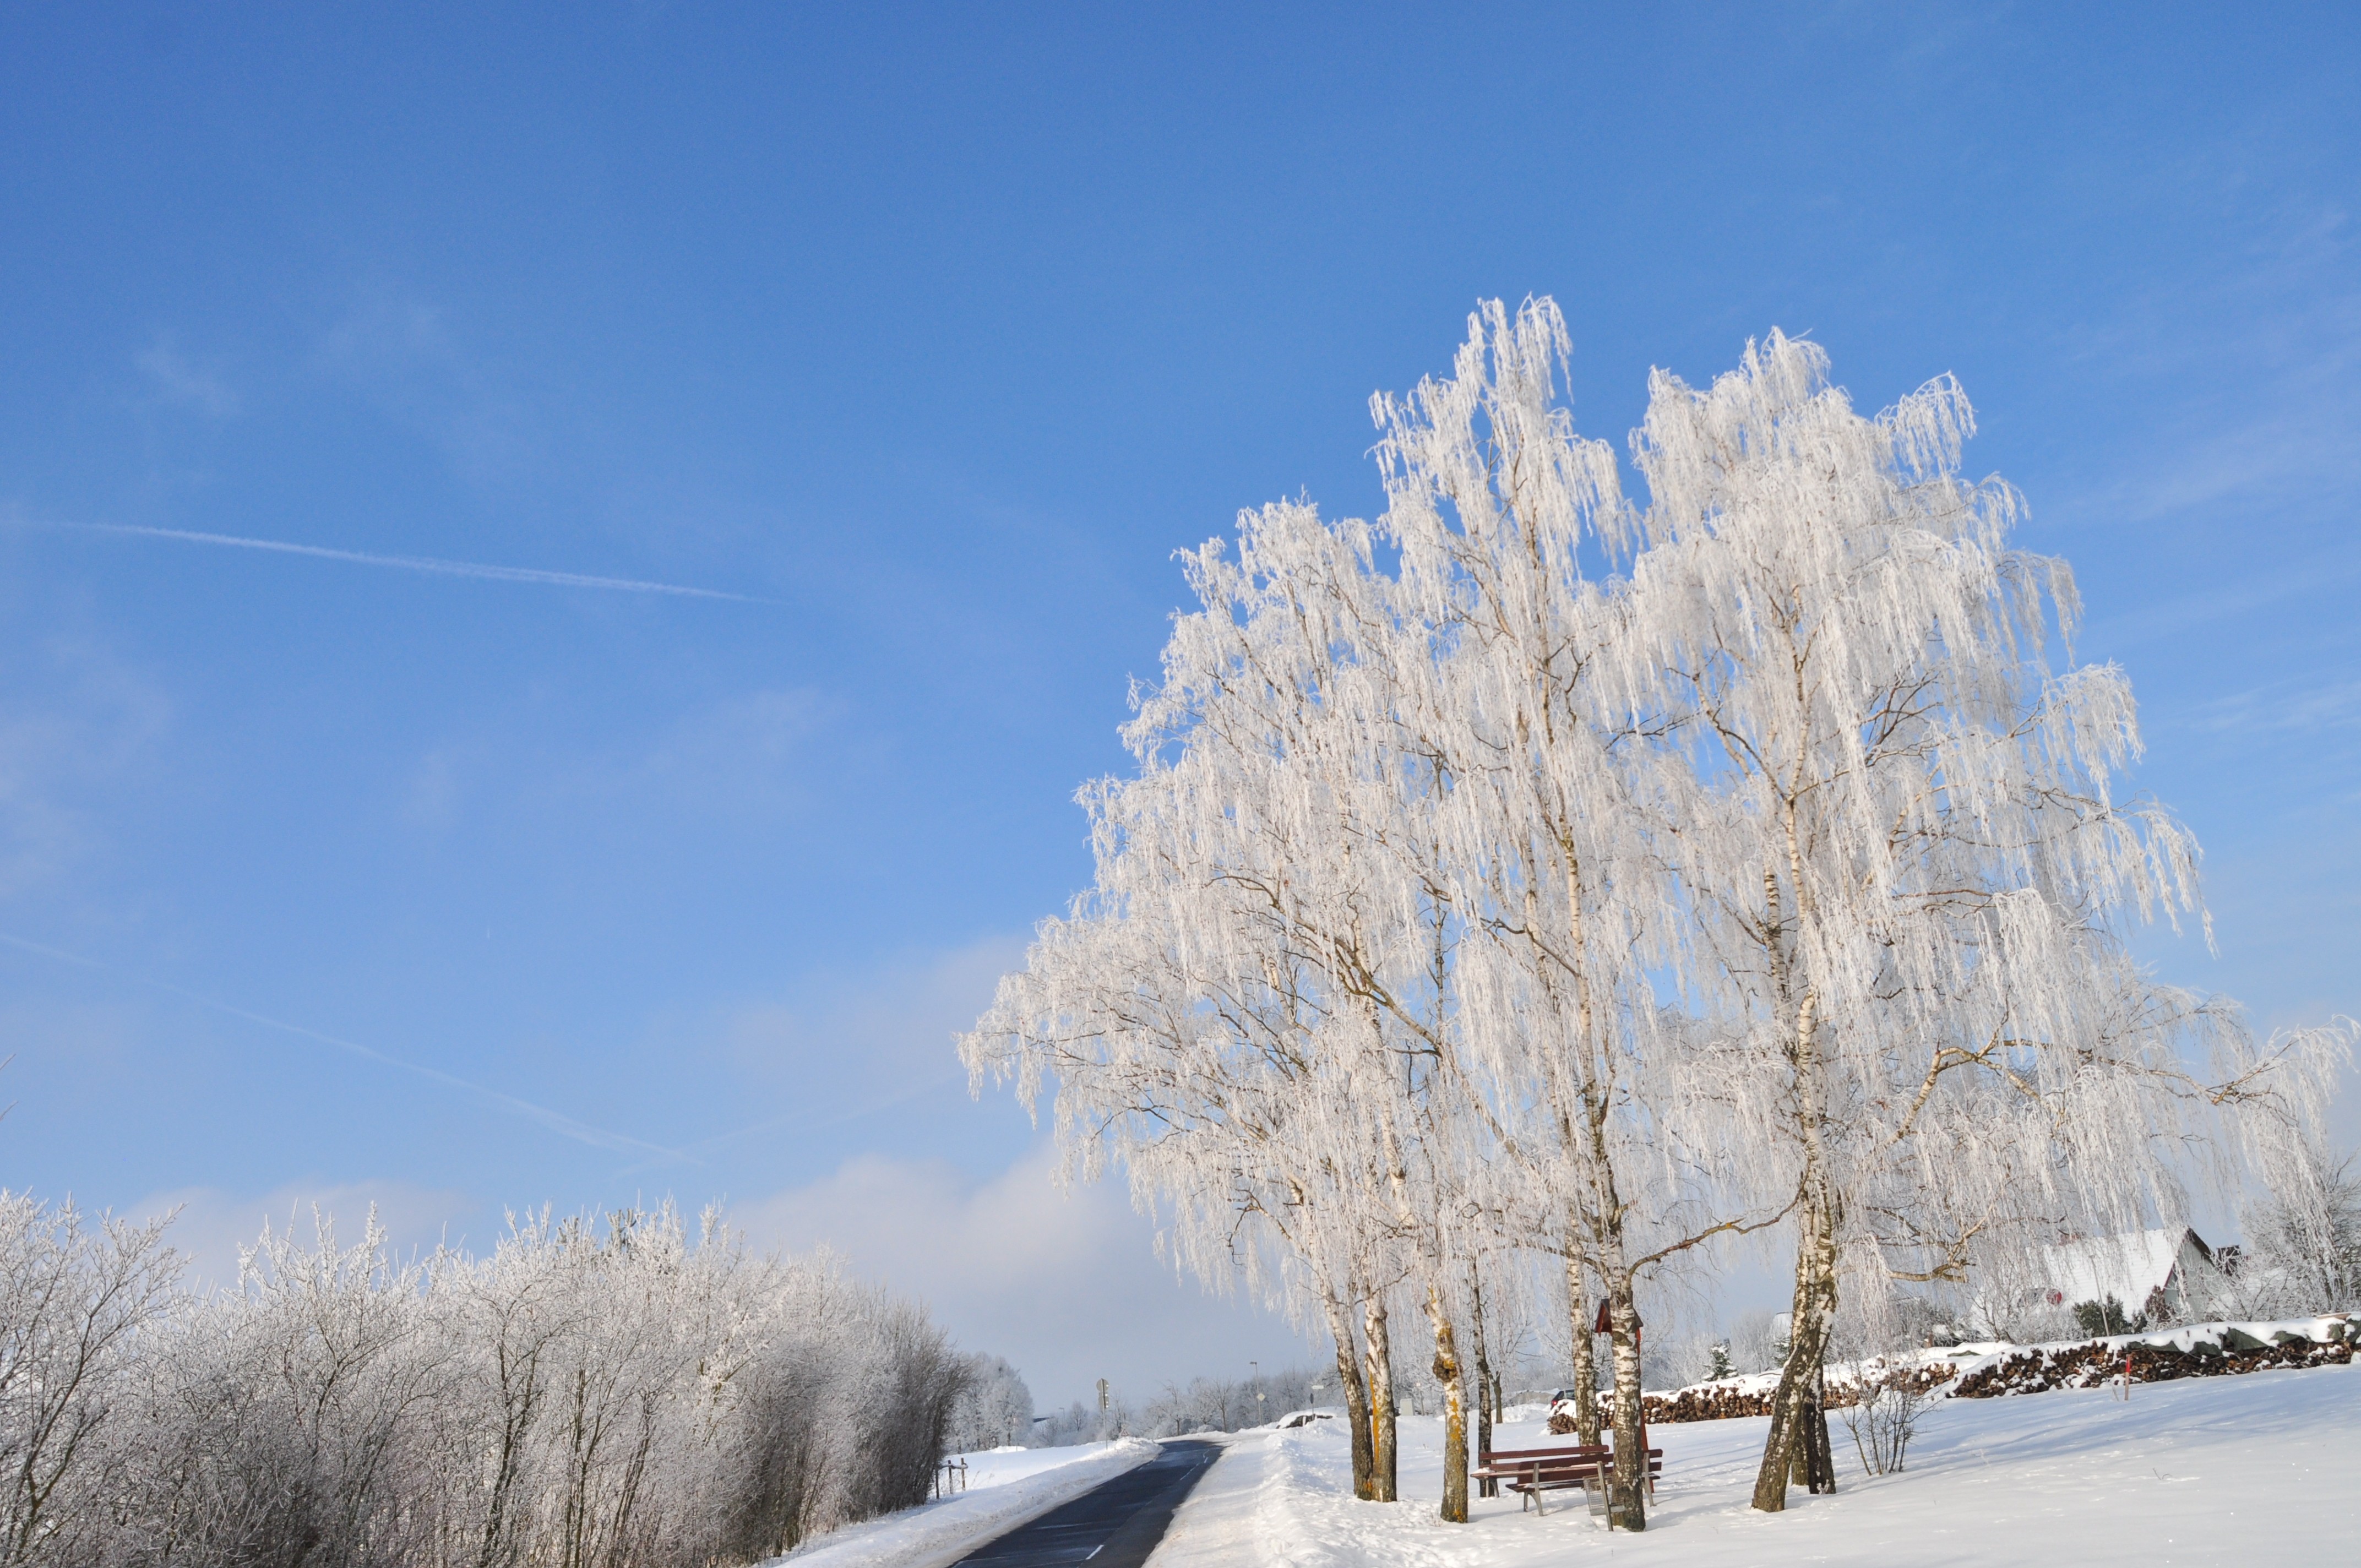 General 4288x2848 nature snow winter road Poland outdoors cold trees sky